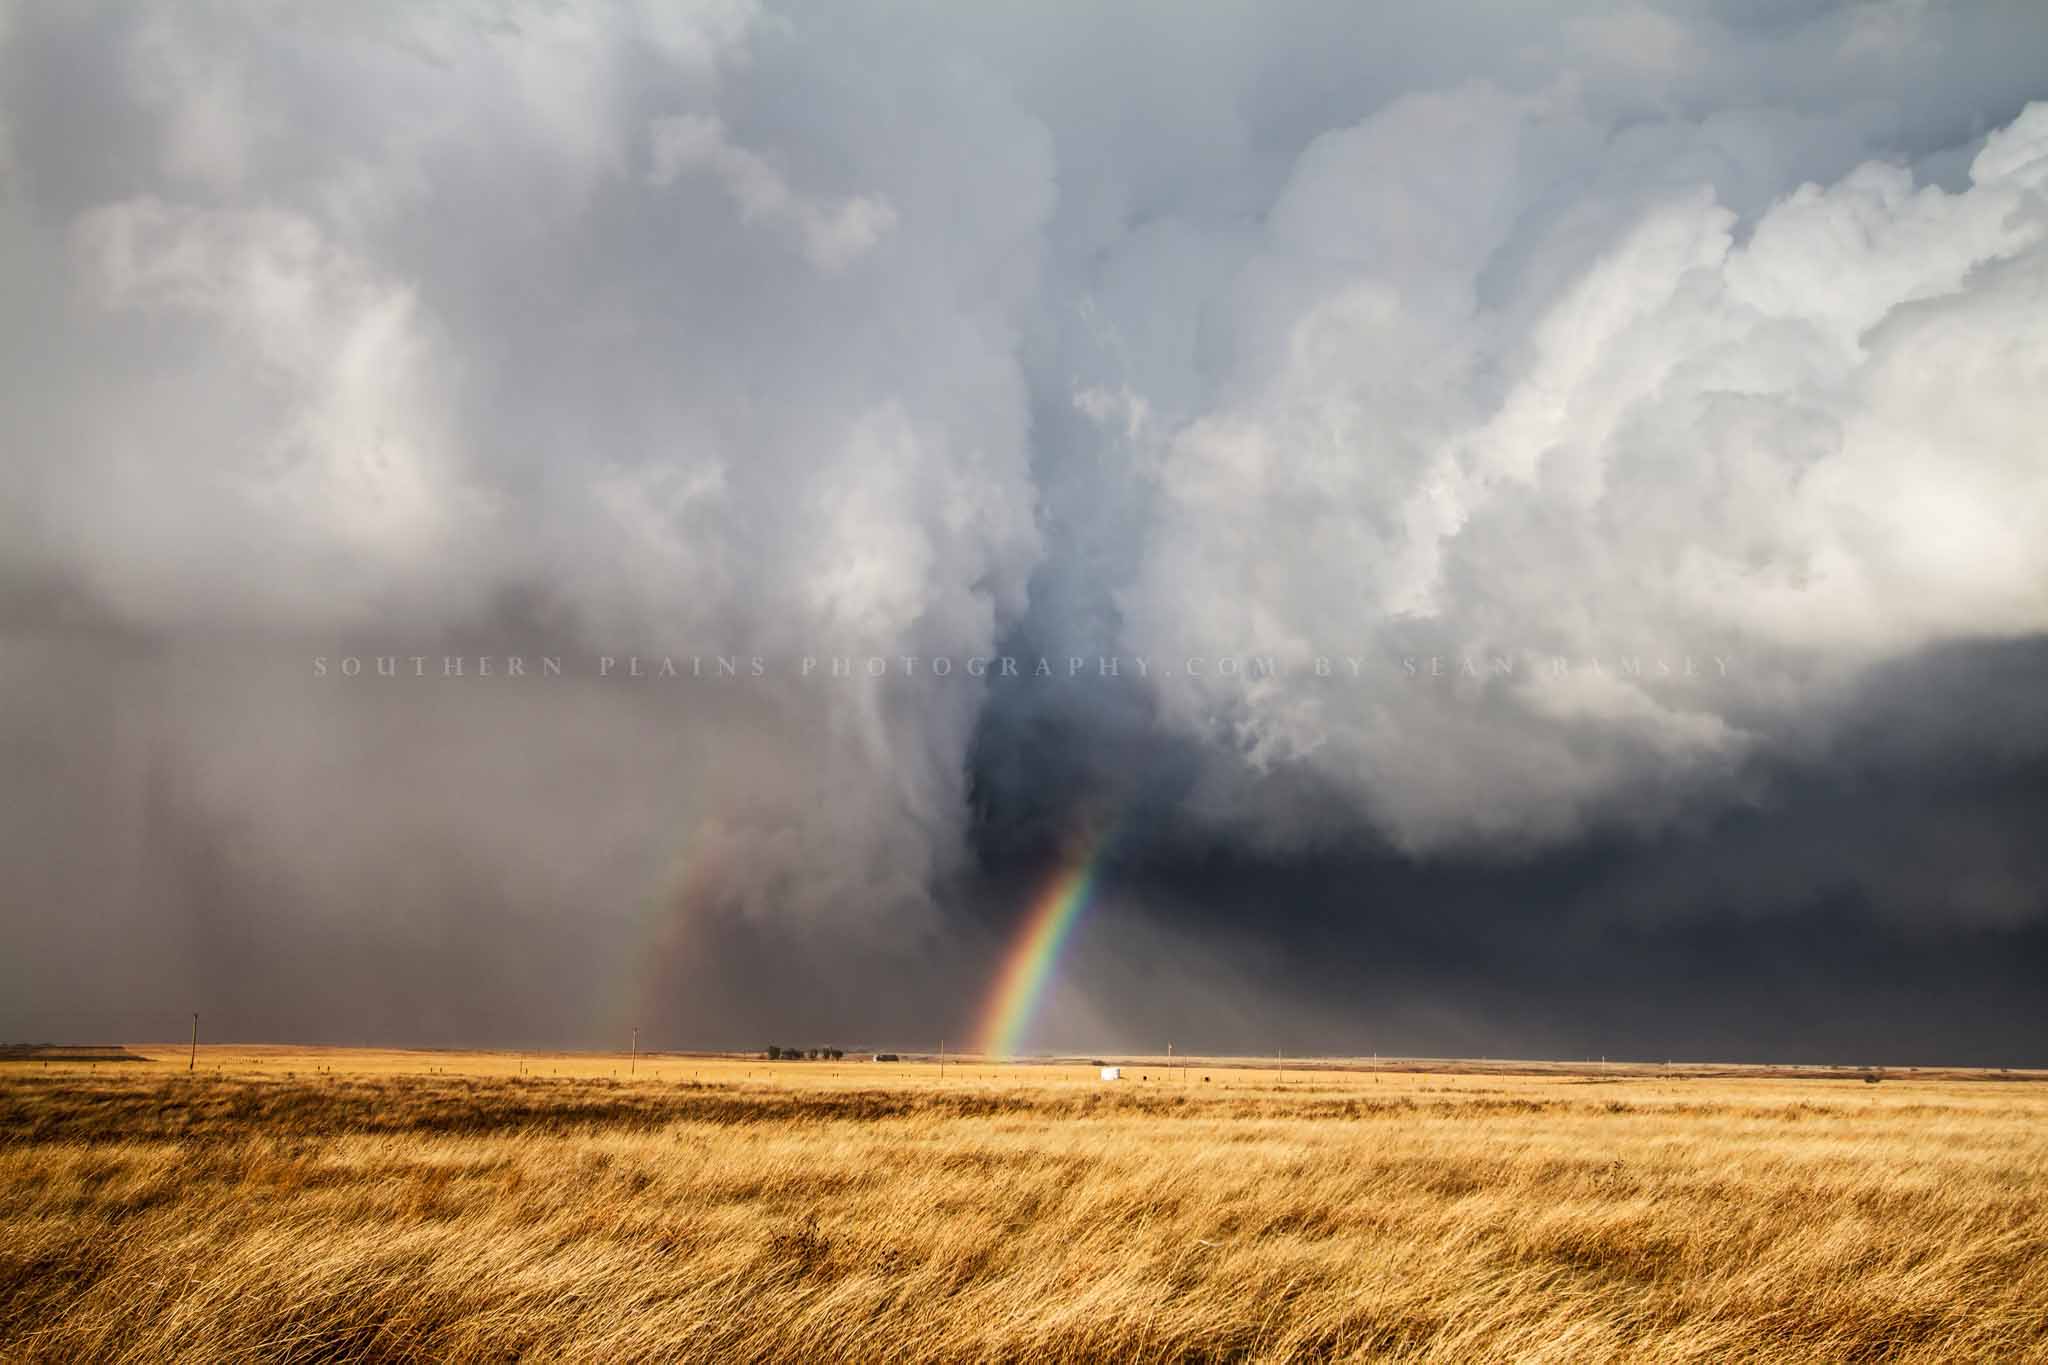 Great plains photography print of a rainbow between a rain wrapped tornado and storm cloud over golden prairie grass on a stormy spring day in Kansas by Sean Ramsey of Southern Plains Photography.